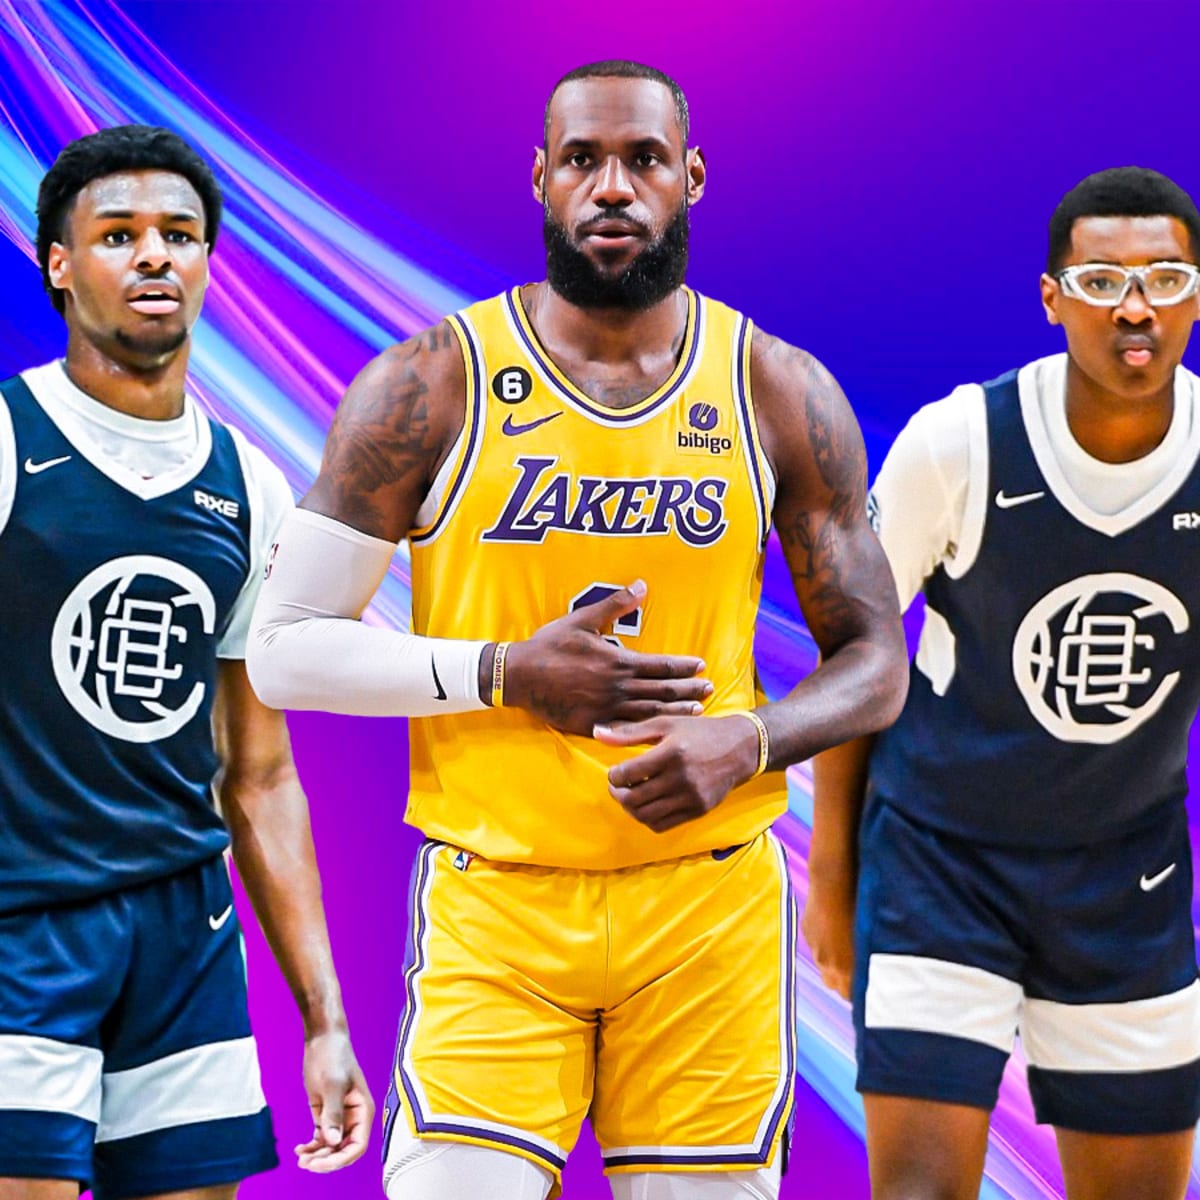 LeBron James Is Not Requesting Trade from Lakers, Despite